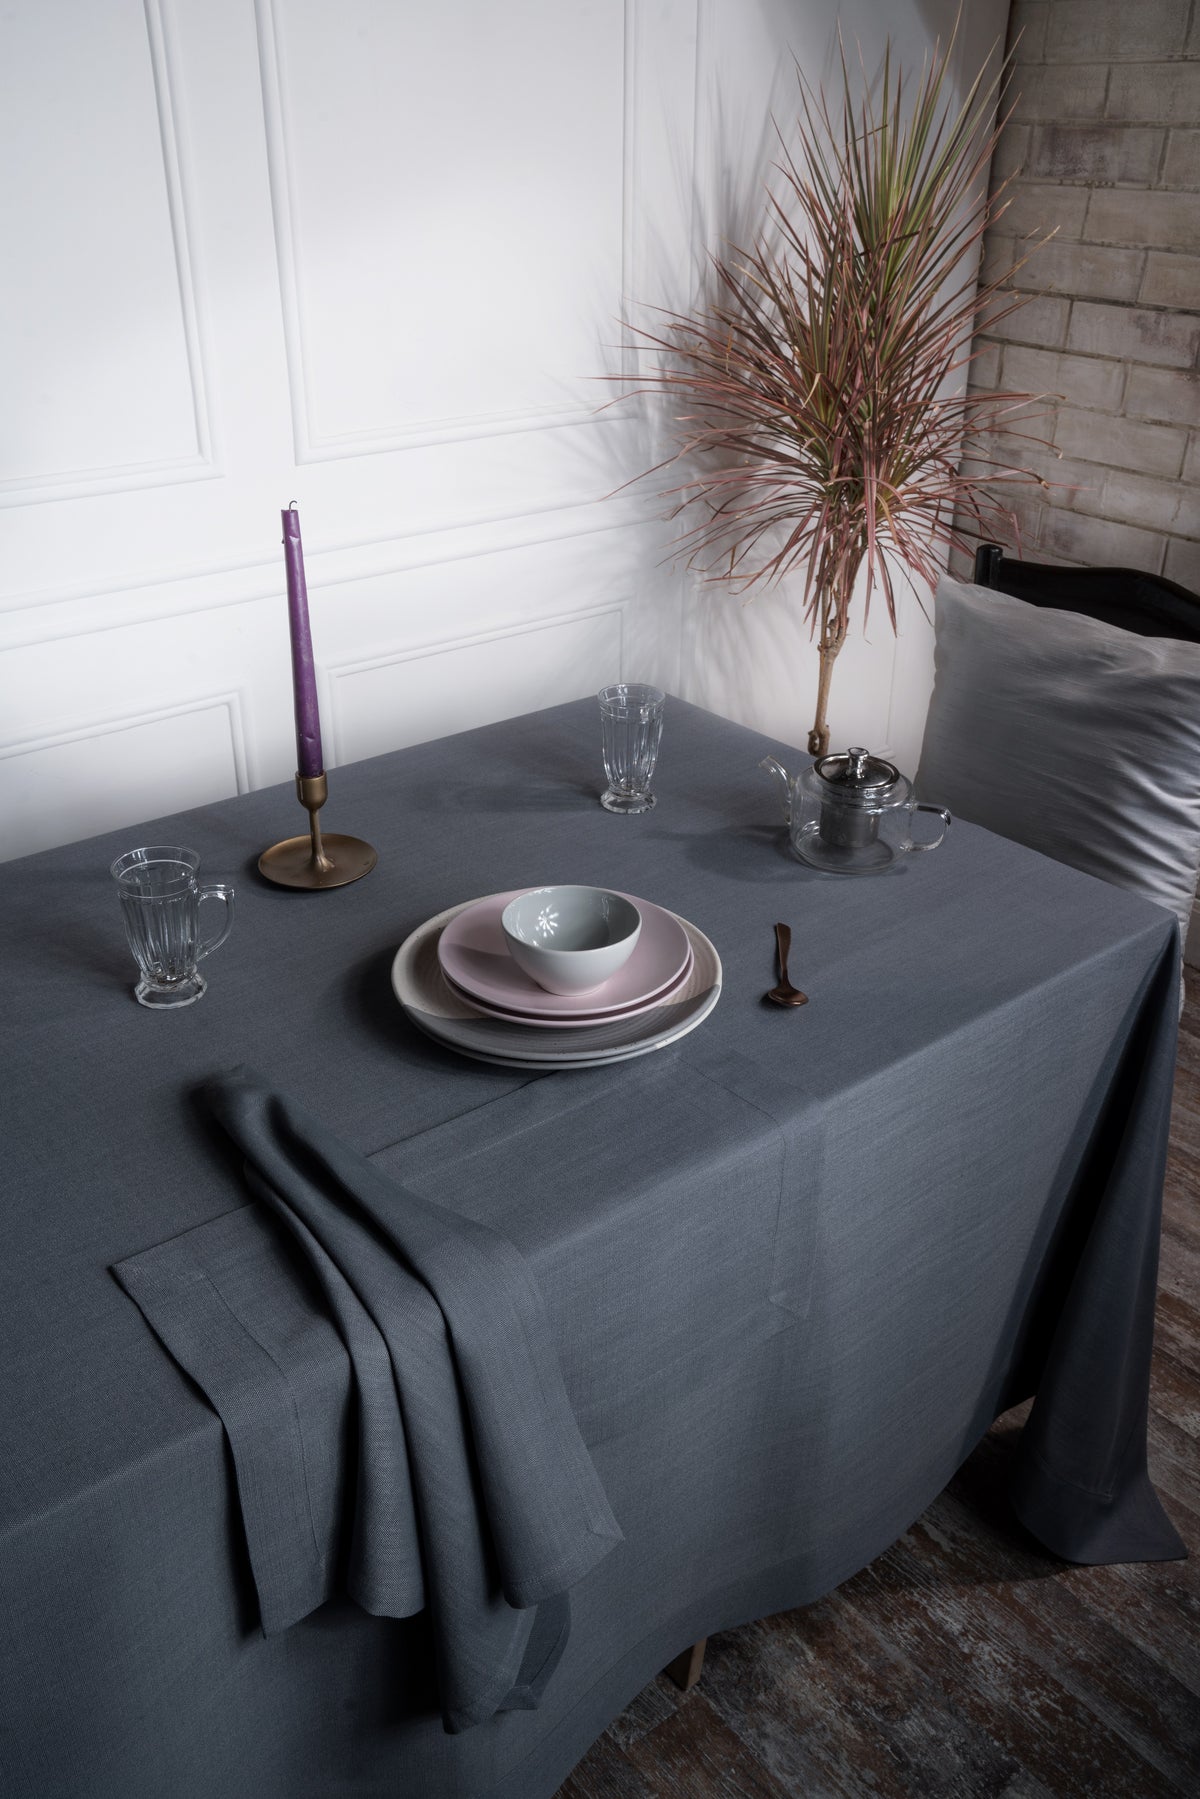 Charcoal Grey Linen Textured Tablecloth - Mitered Corner